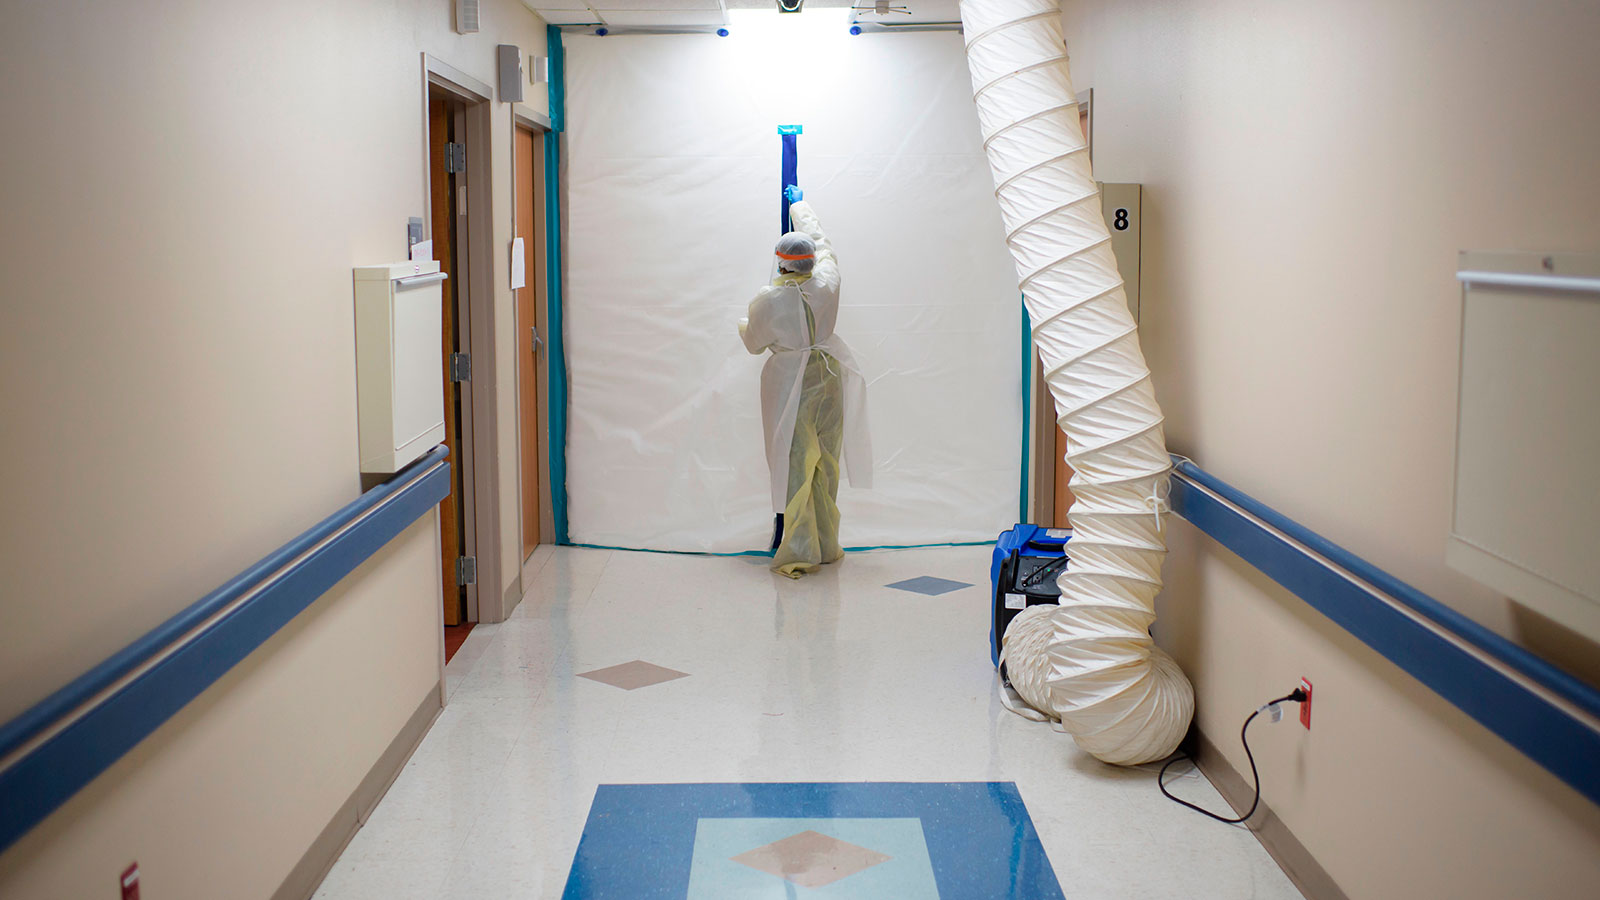 A healthcare worker zips up a protective barrier in the Covid-19 Unit at United Memorial Medical Center in Houston, Texas on July 2.